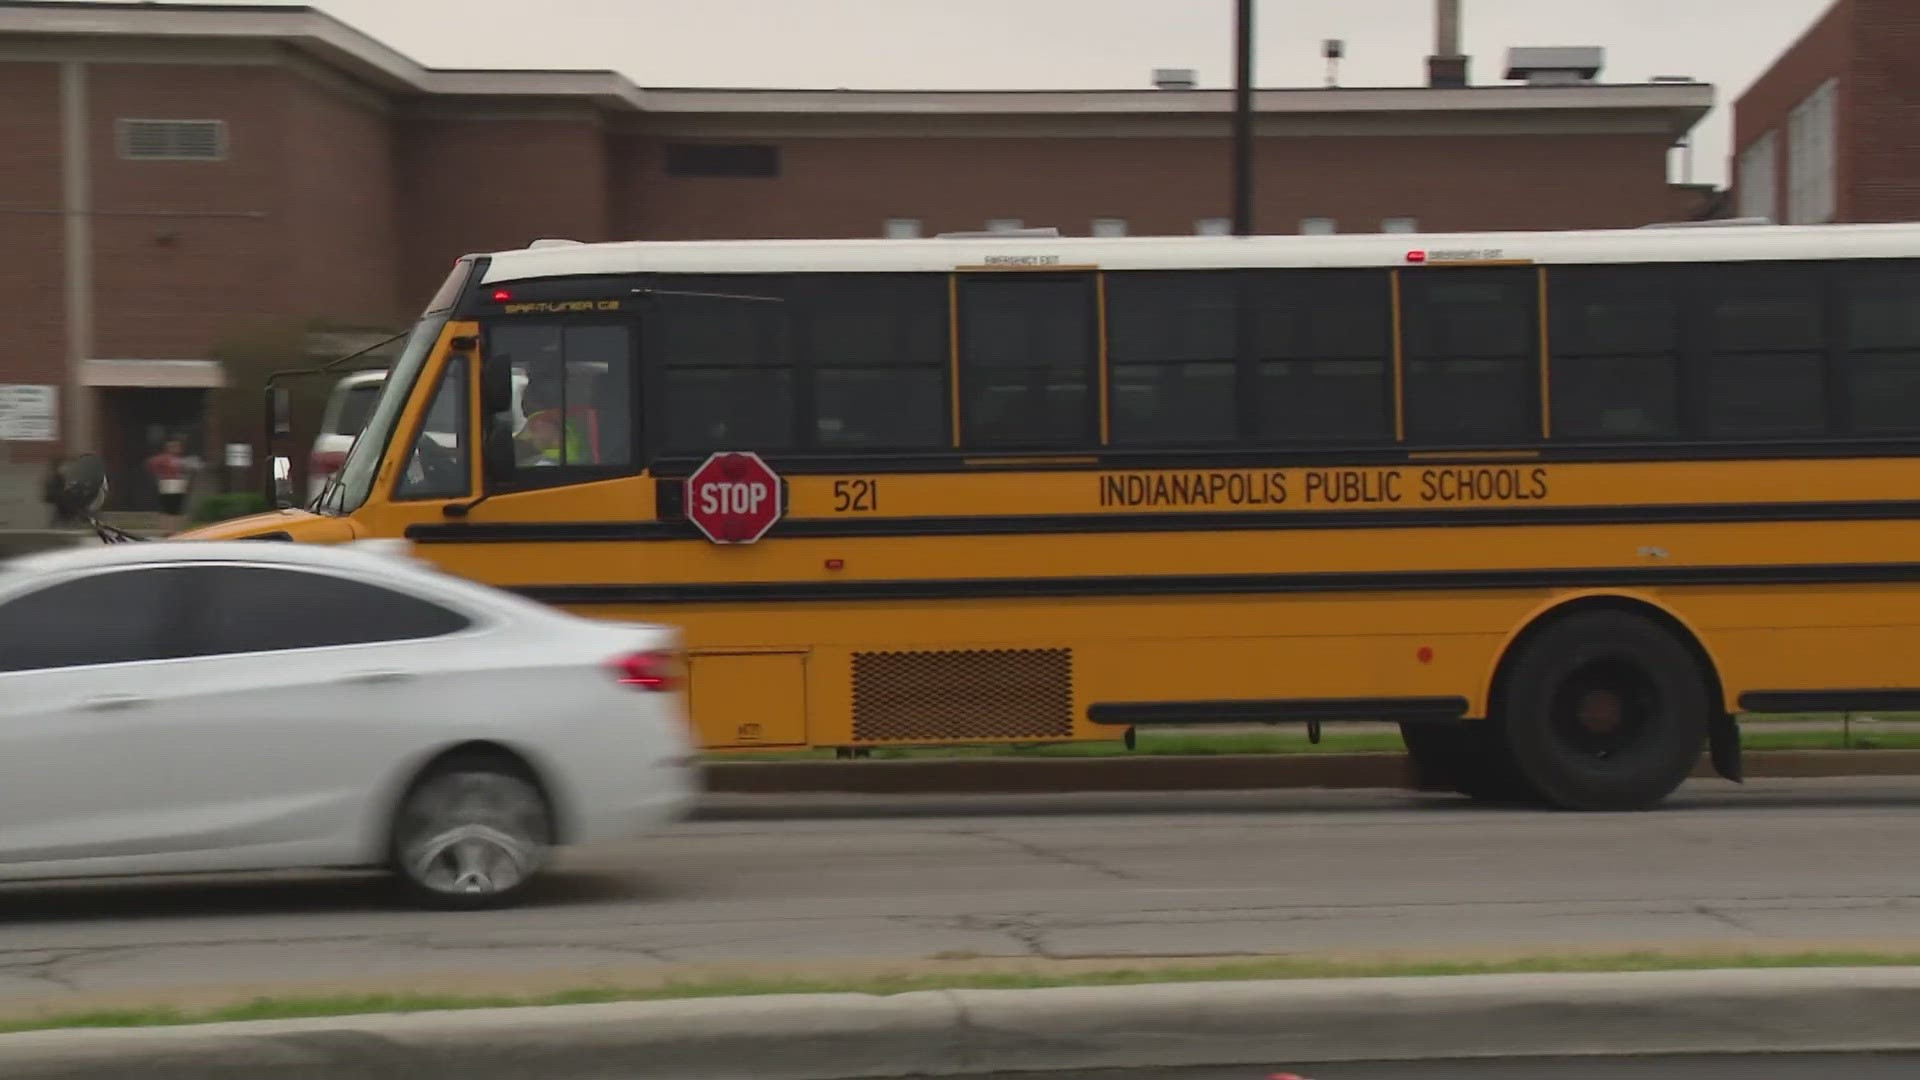 More than 16k students in the district have the option for busing. Indianapolis public schools has learned that not all families are choosing that option.